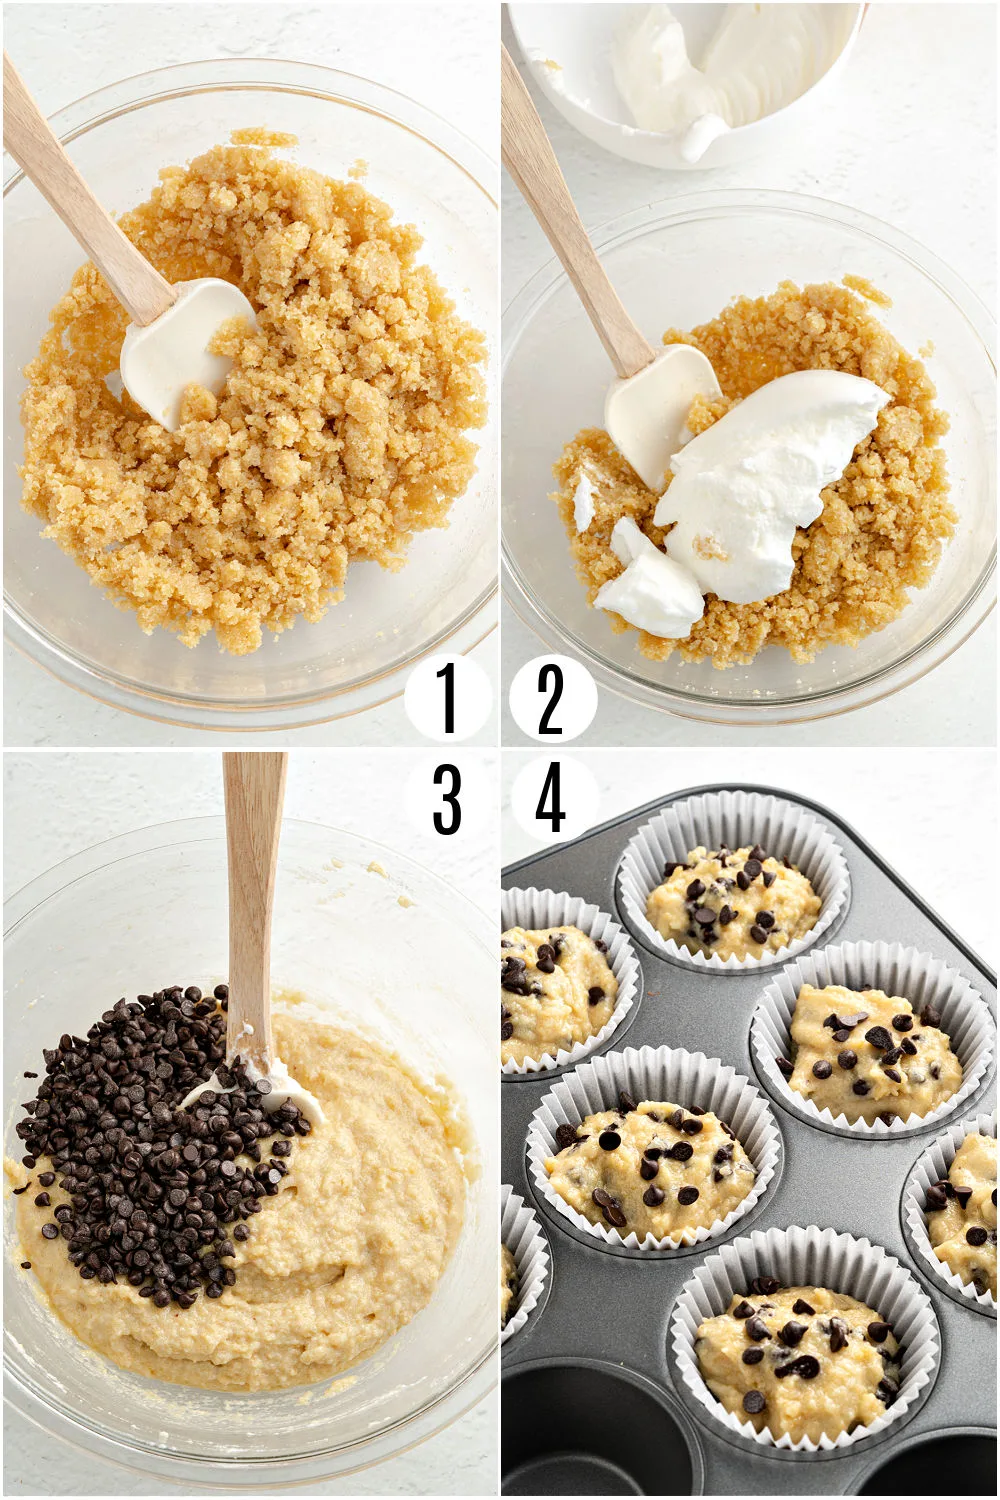 Step by step photos showing how to make chocolate chip muffins.